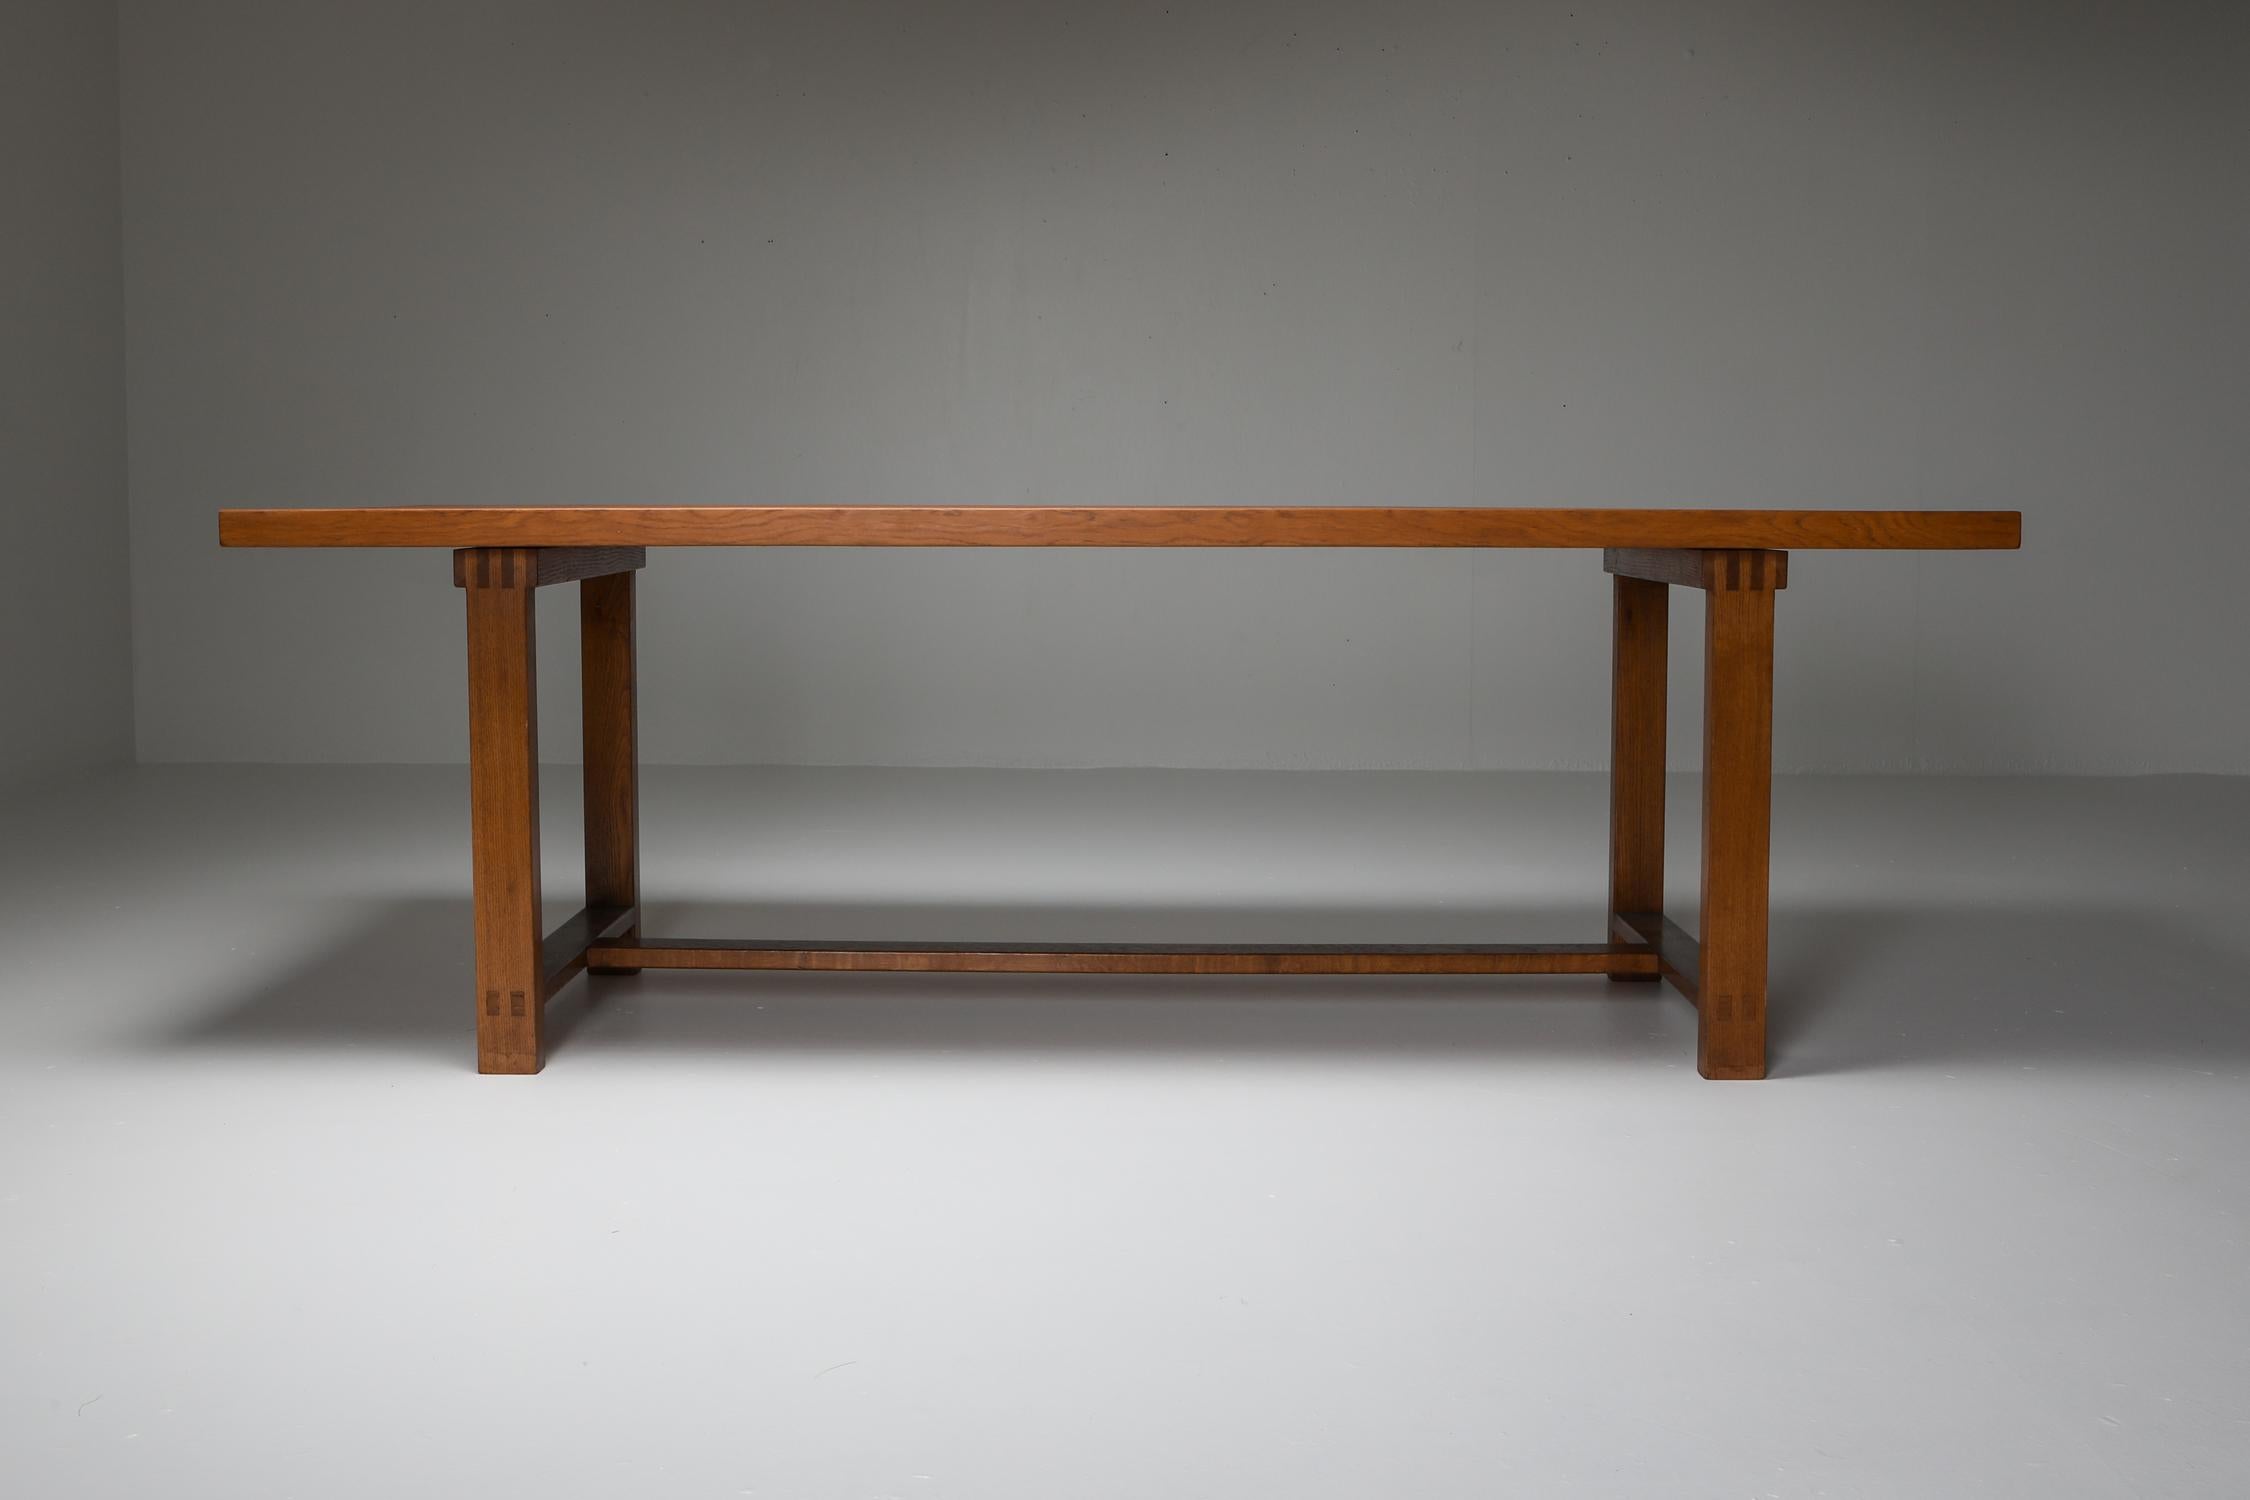 Pierre Chapo, solid elm dining table, T01D, France, 1960s.

Superb and rare rectangular dining table measuring 226 wide.
We've matched these with original S24 dining chairs in elm and natural tan leather, which are available in another